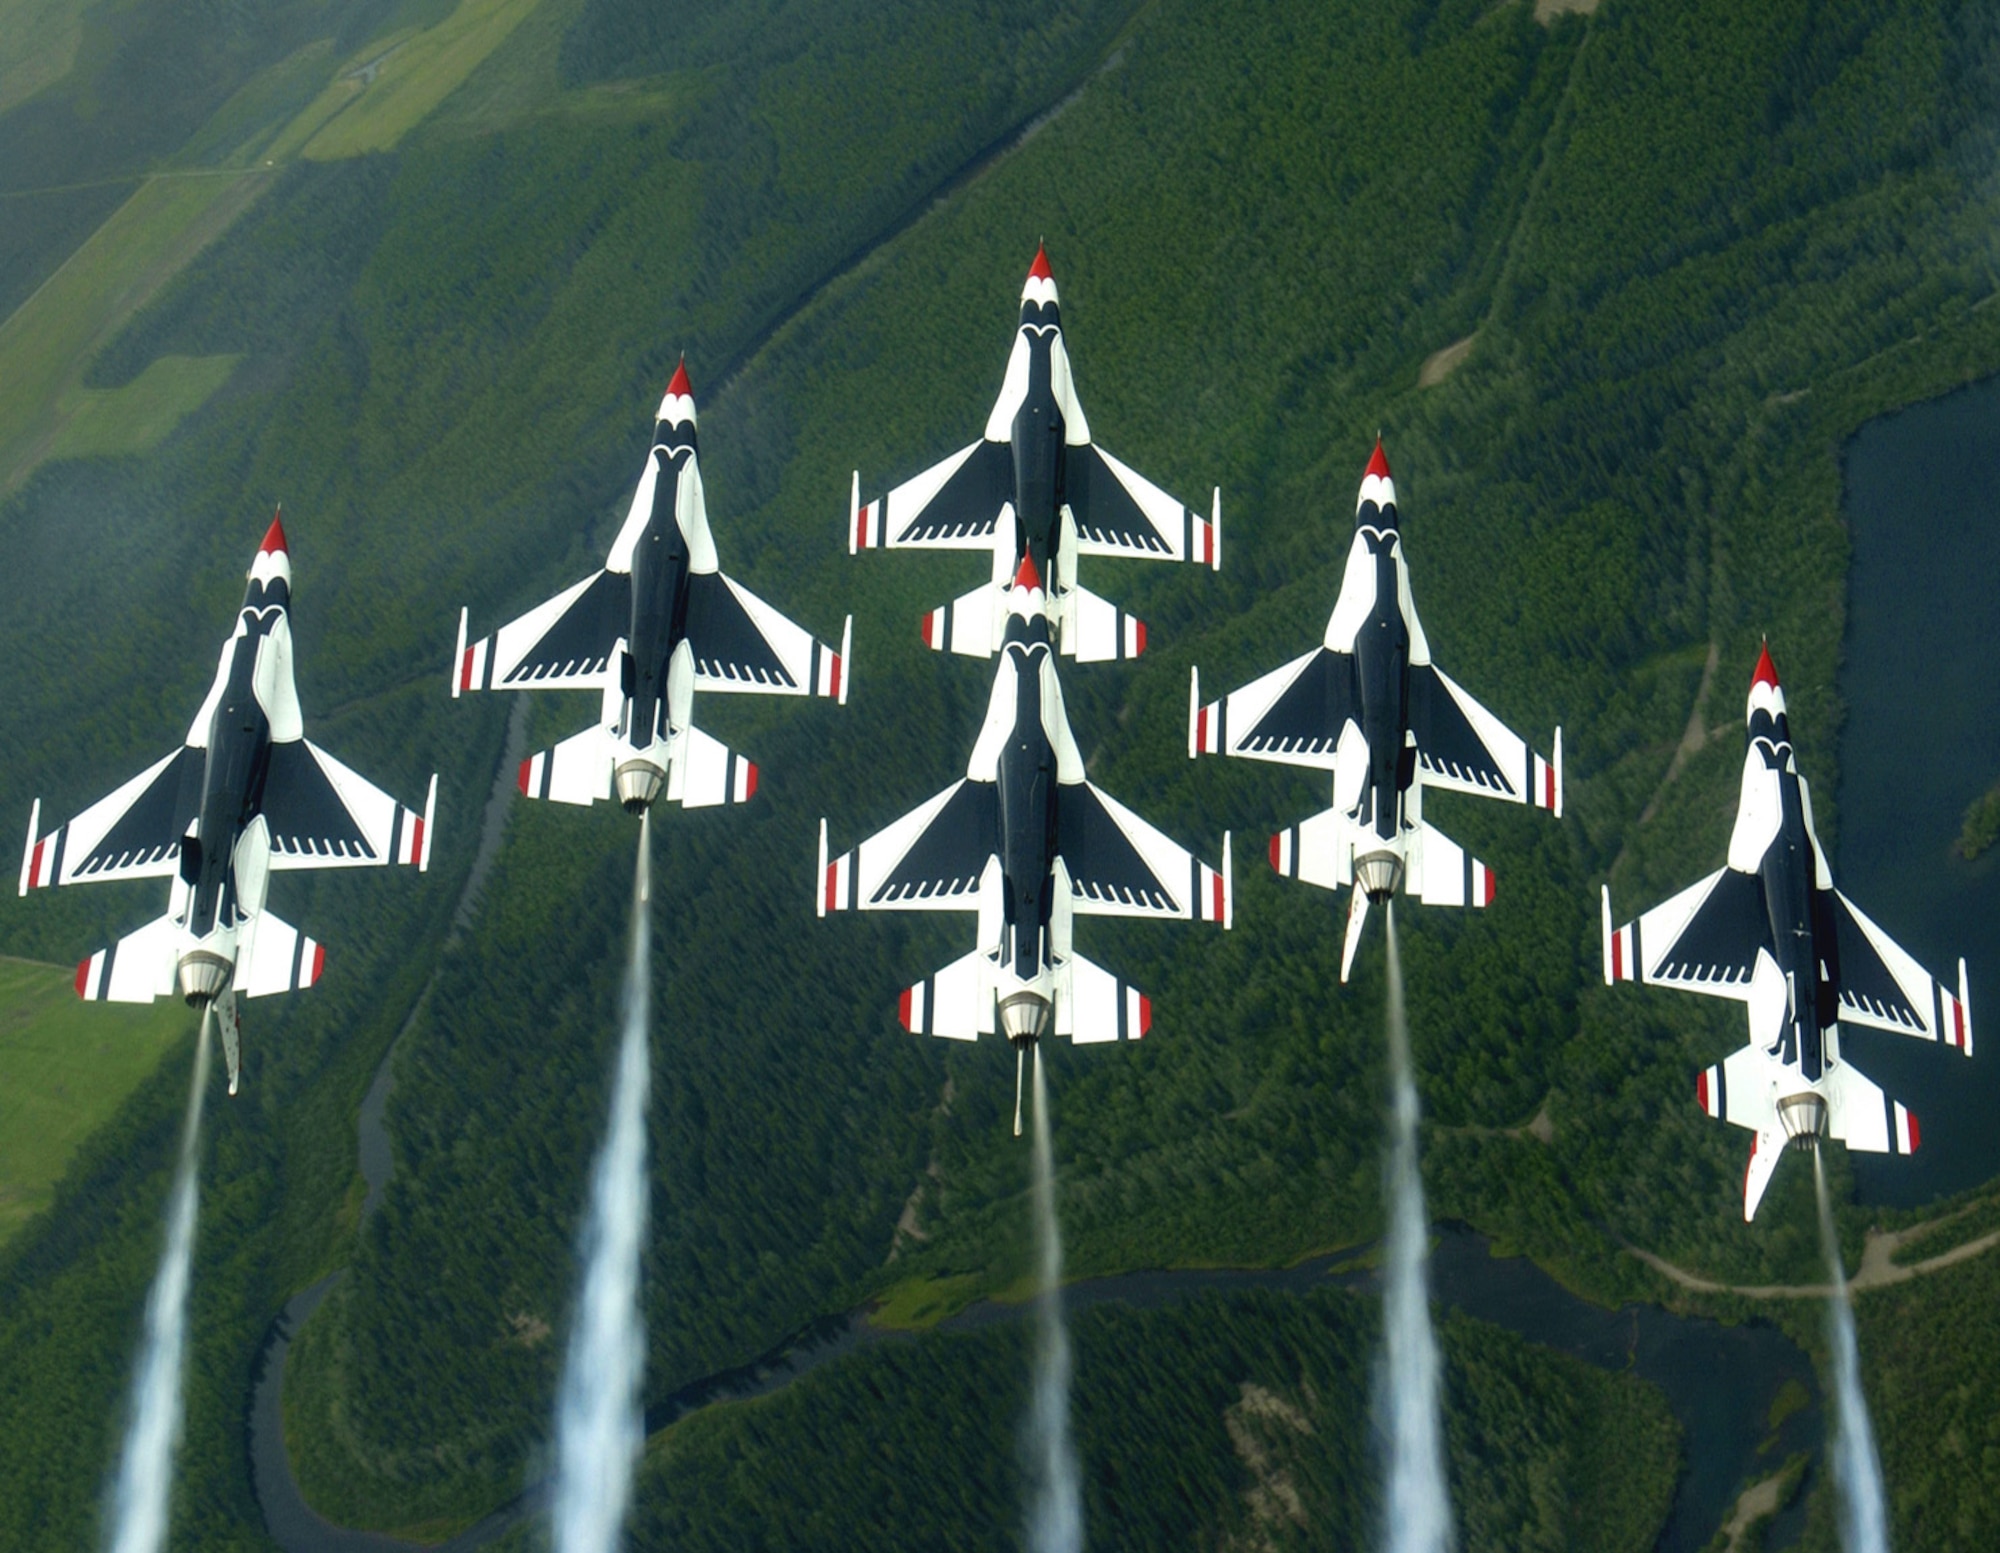 EIELSON AIR FORCE BASE, Alaska -- The Thunderbirds aerial demonstration team performs a loop while in the famous Delta formation here. The Thunderbirds fly the F-16 Fighting Falcon, a fighter that is highly maneuverable and has a proven record in combat. (U.S. Air Force photo by Tech. Sgt. Sean M. White)